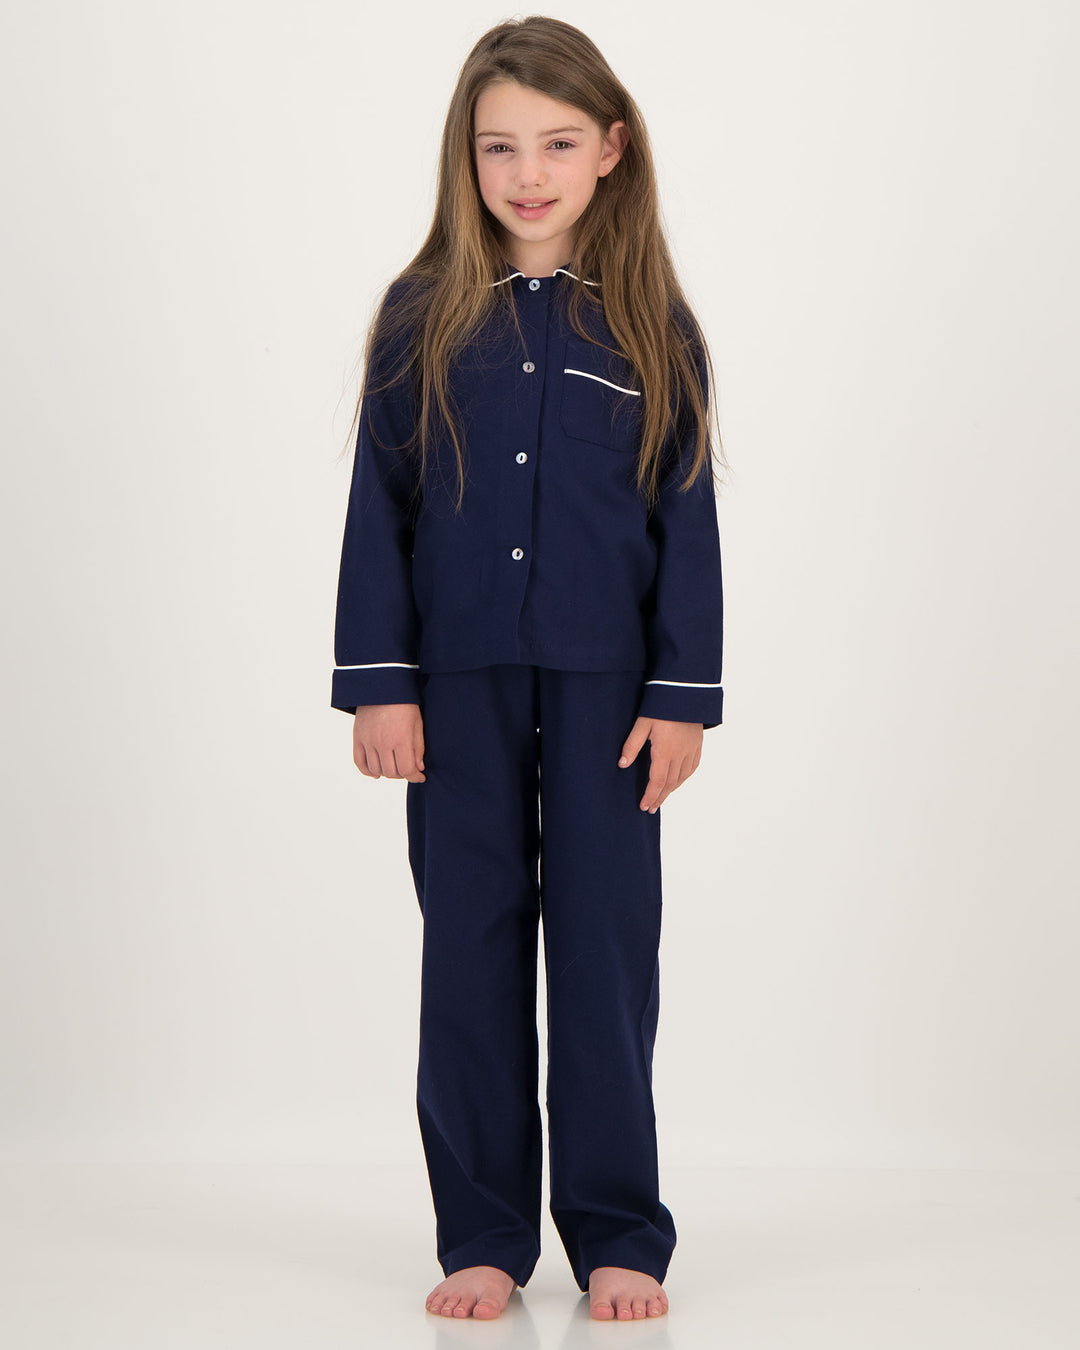 Girls Long Flannel Pyjamas Navy with White Piping Front - Woodstock Laundry